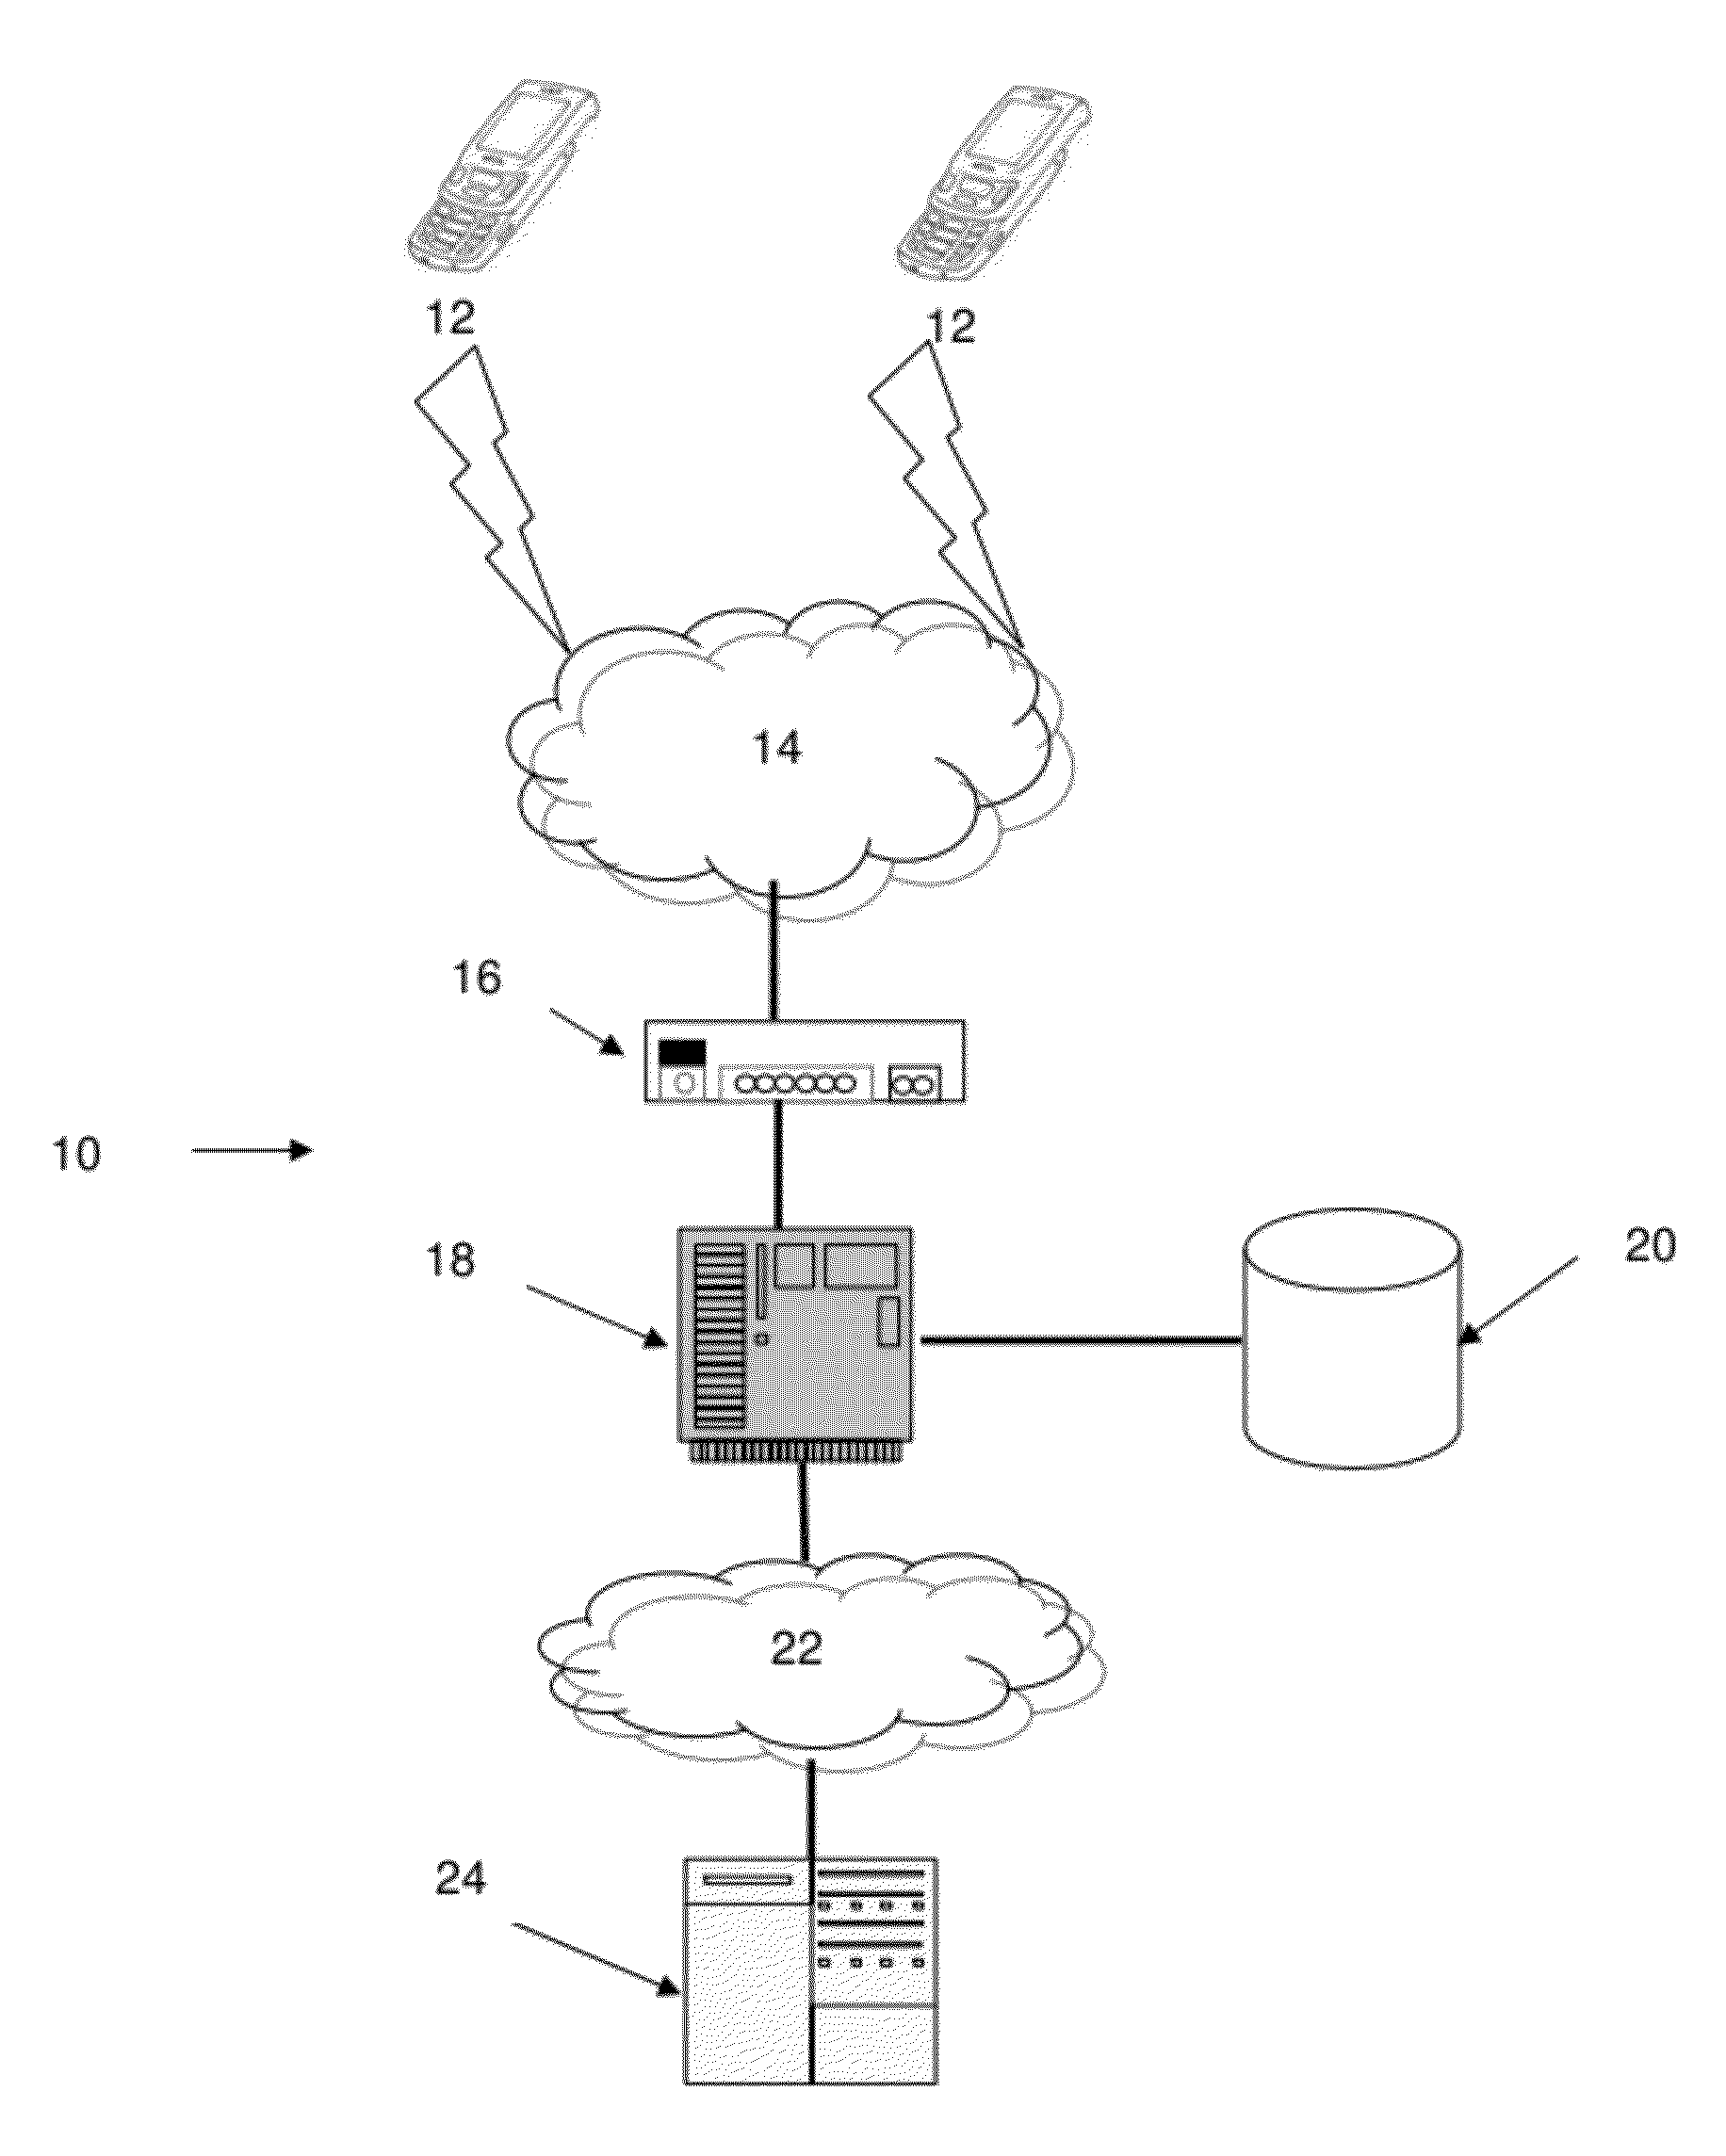 Method for Delivering Email for Viewing on a Mobile Communication Device